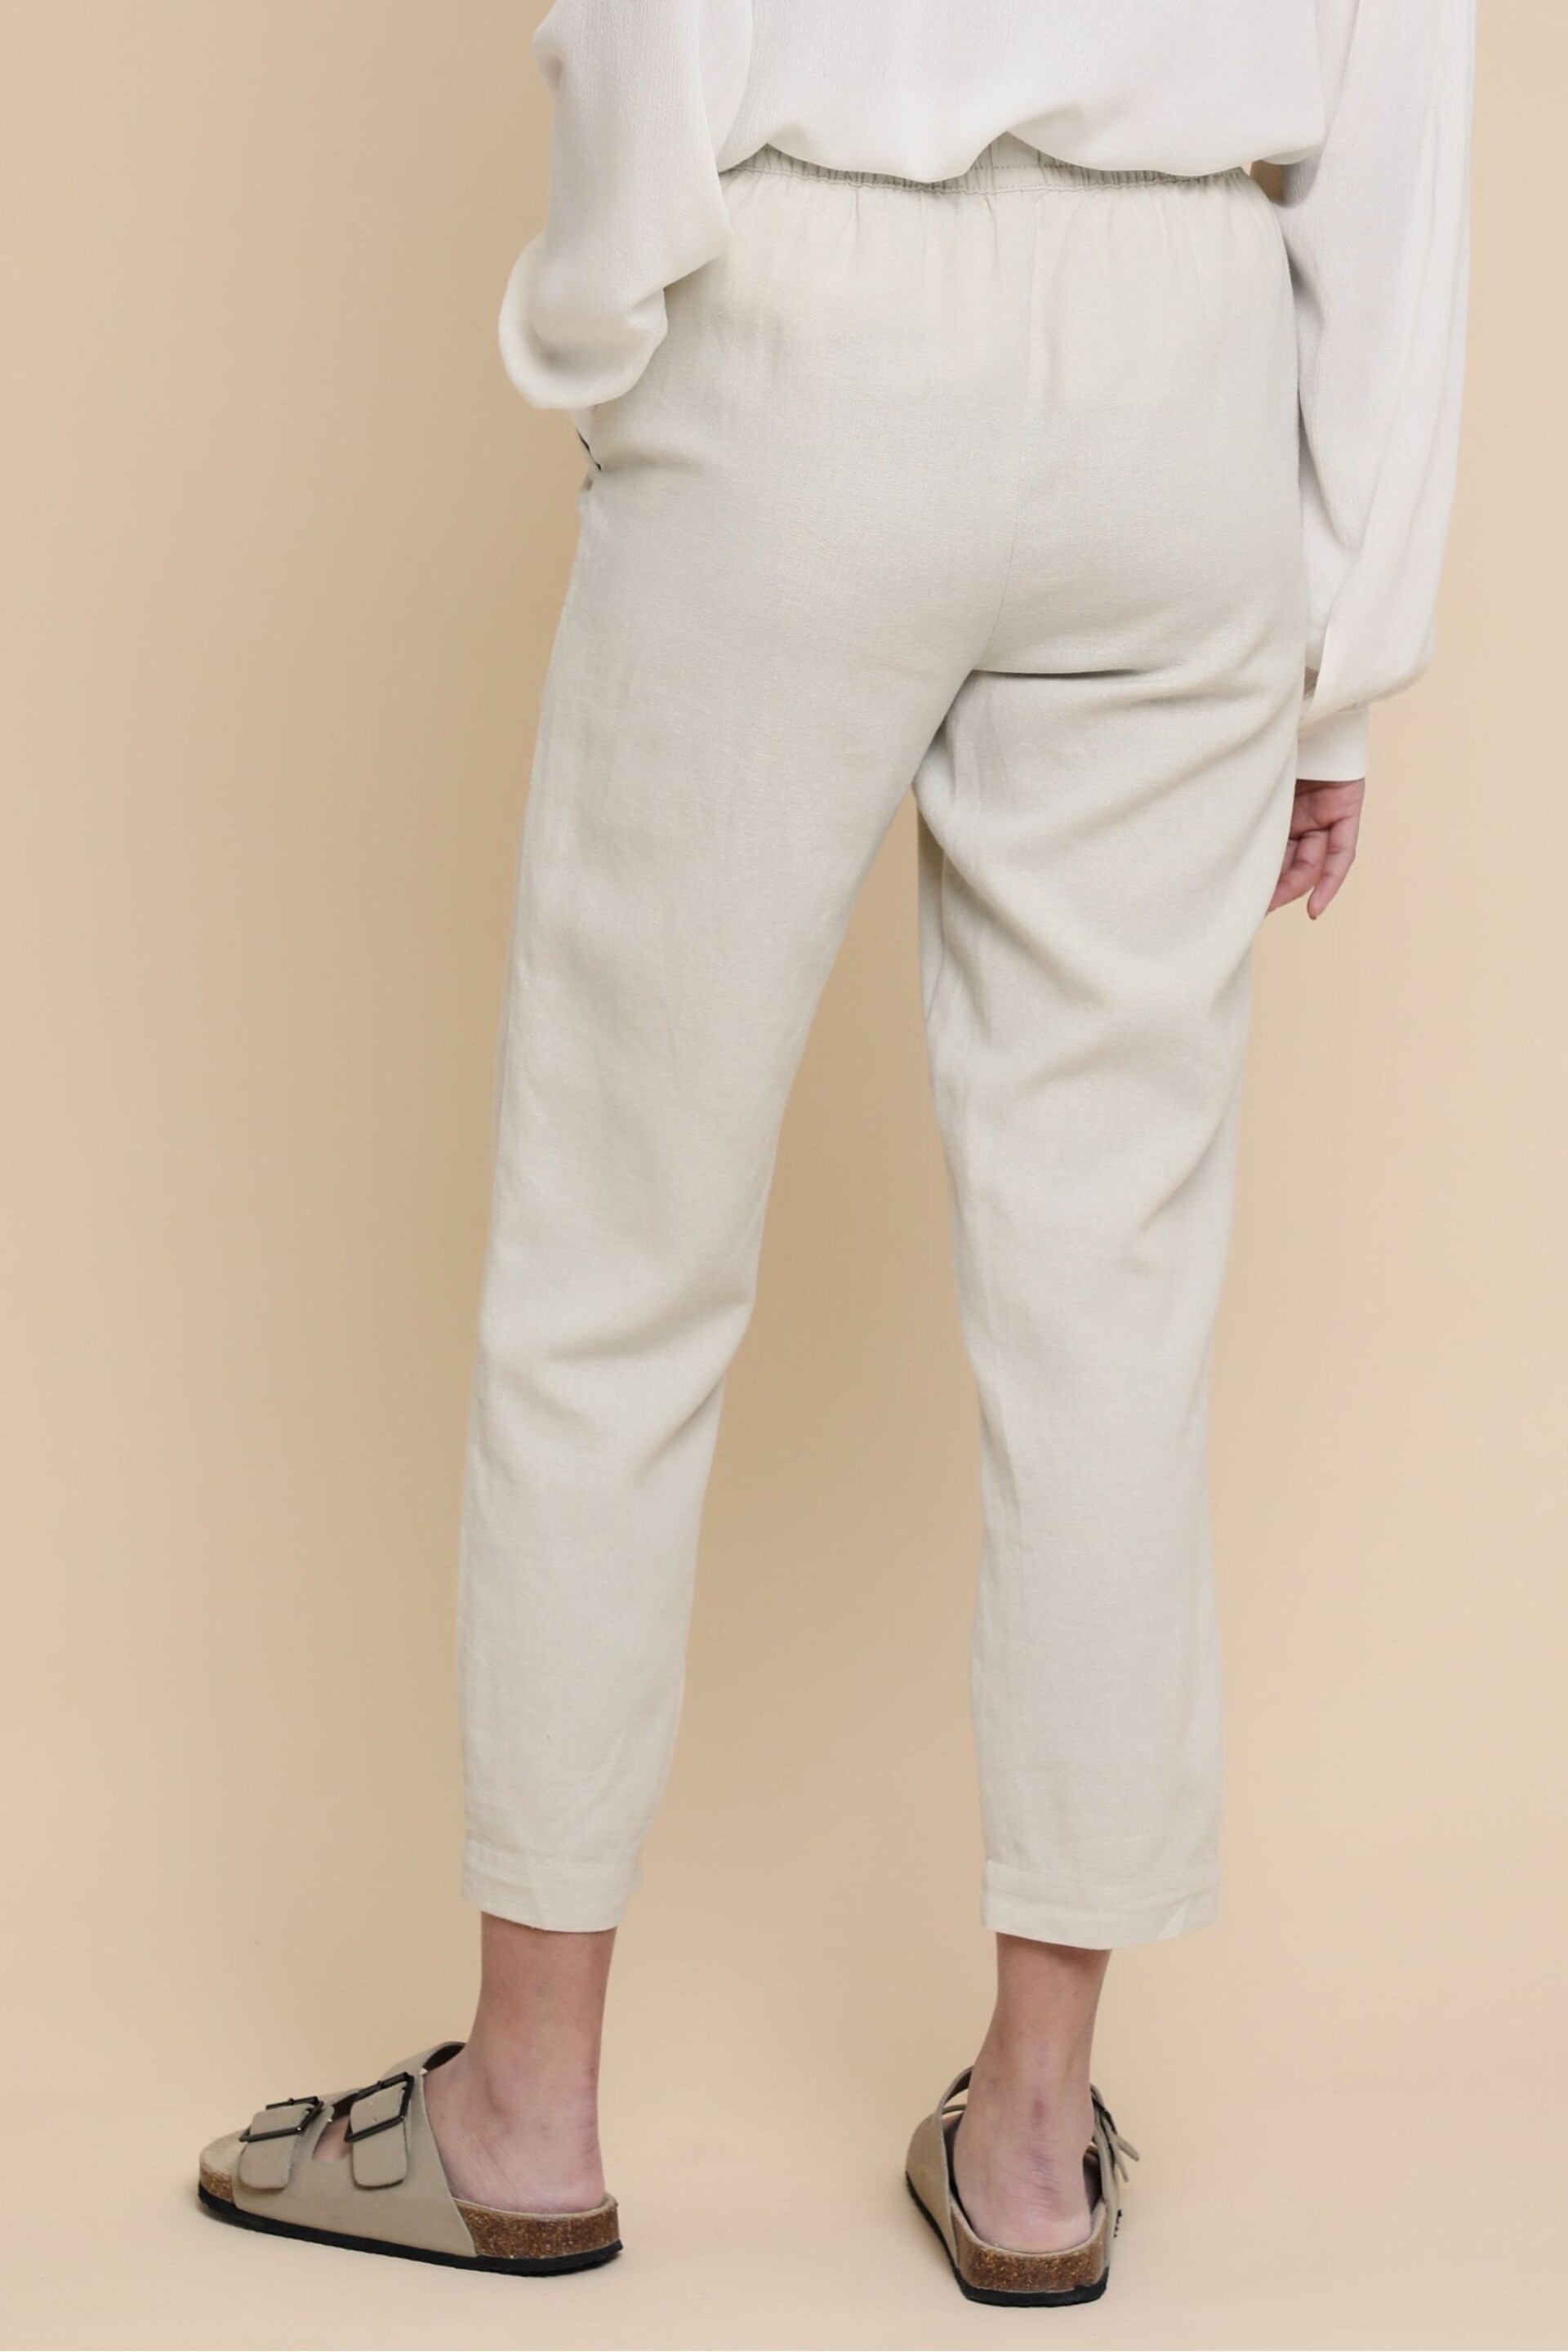 Threadbare Brown Petite Linen Blend Tapered Trousers - Image 2 of 4